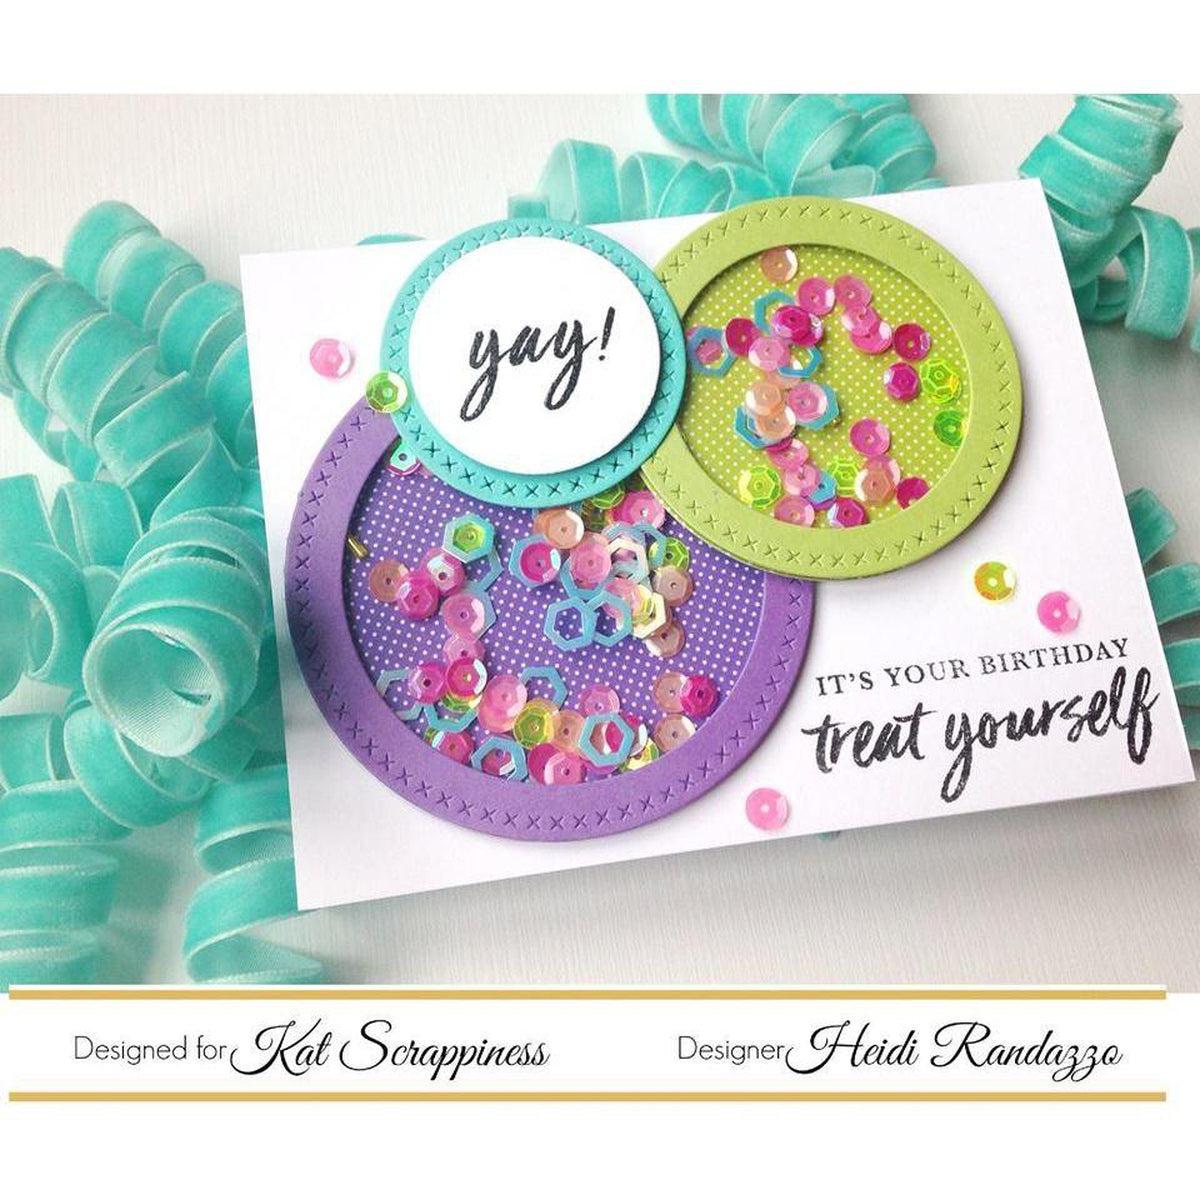 Rock Candy Sequin Mix - Kat Scrappiness